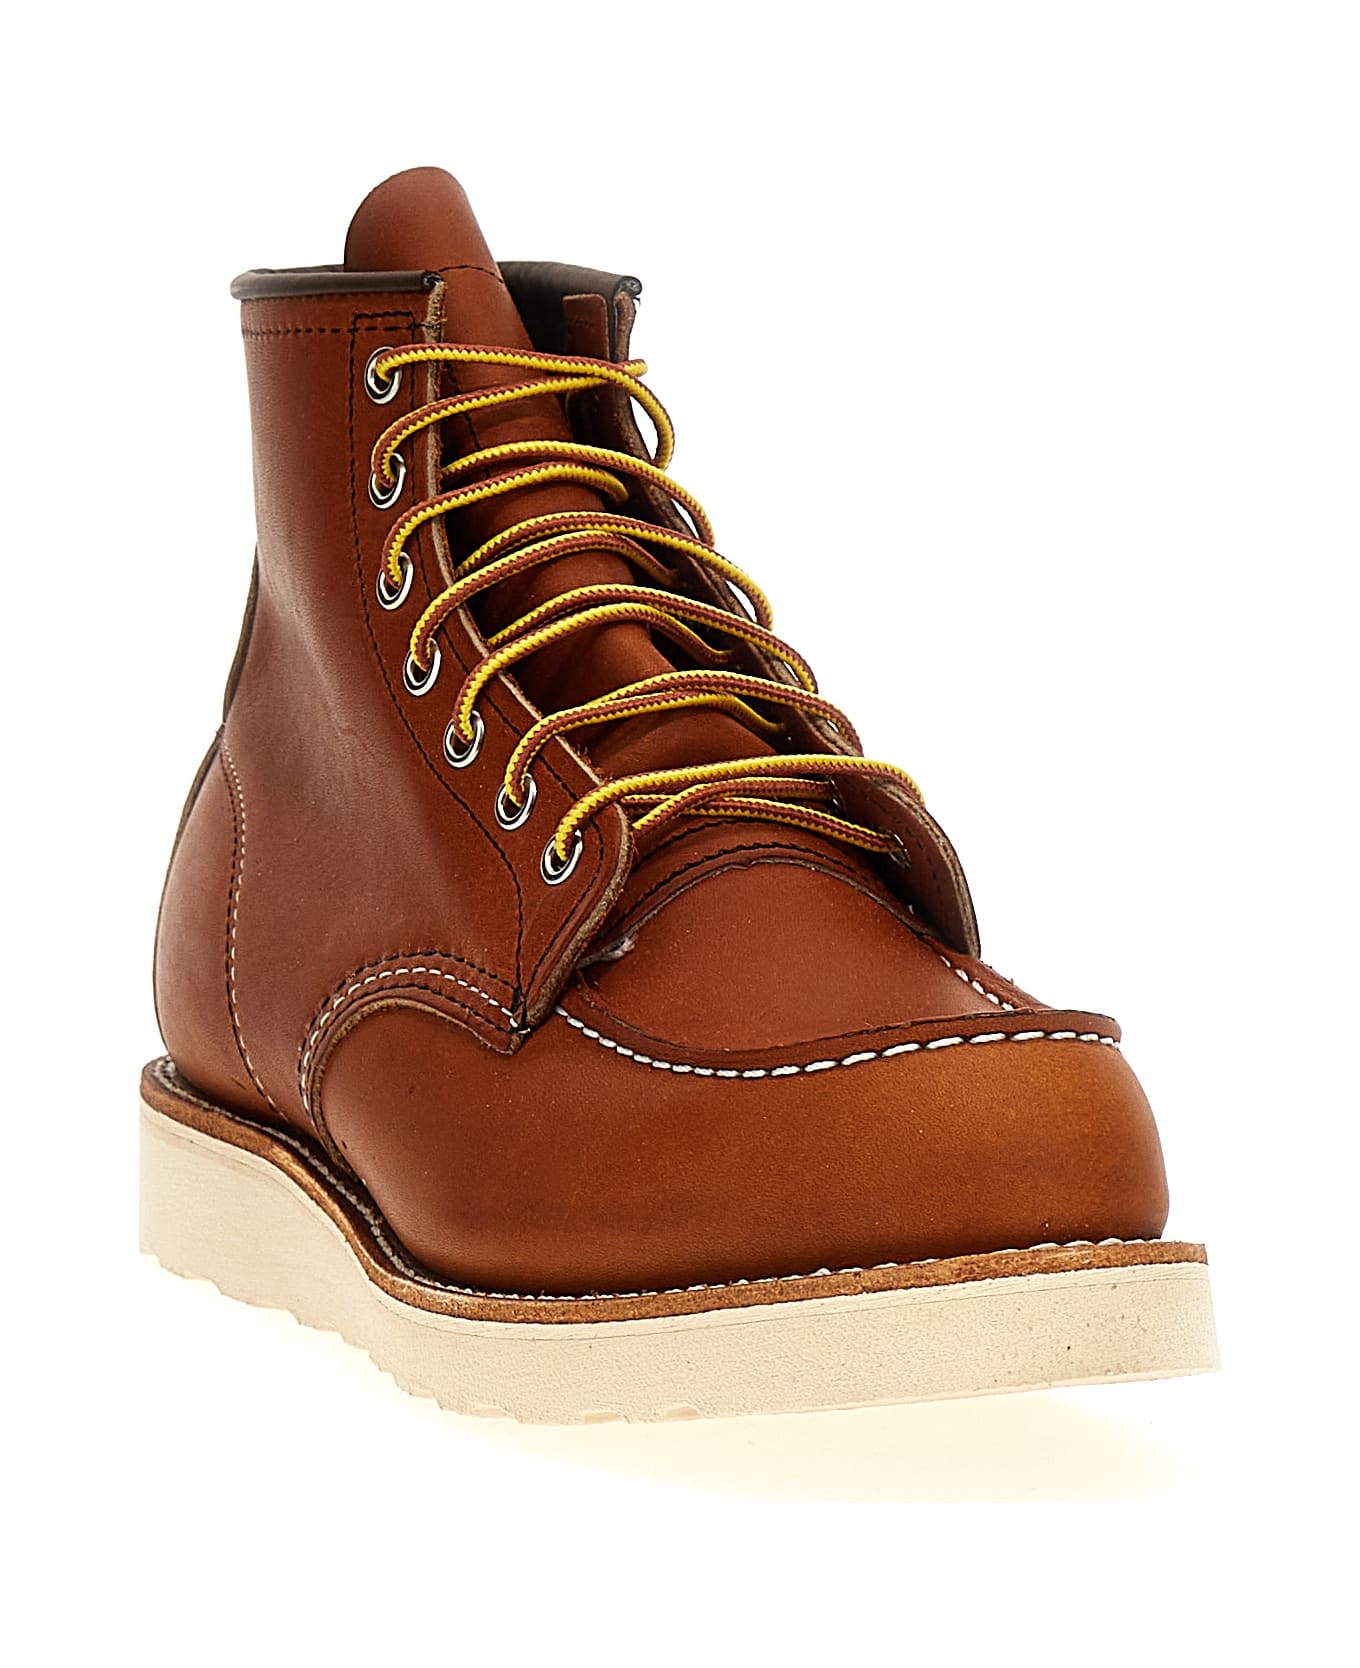 Red Wing 'classic Moc' Ankle Boots - Brown ブーツ